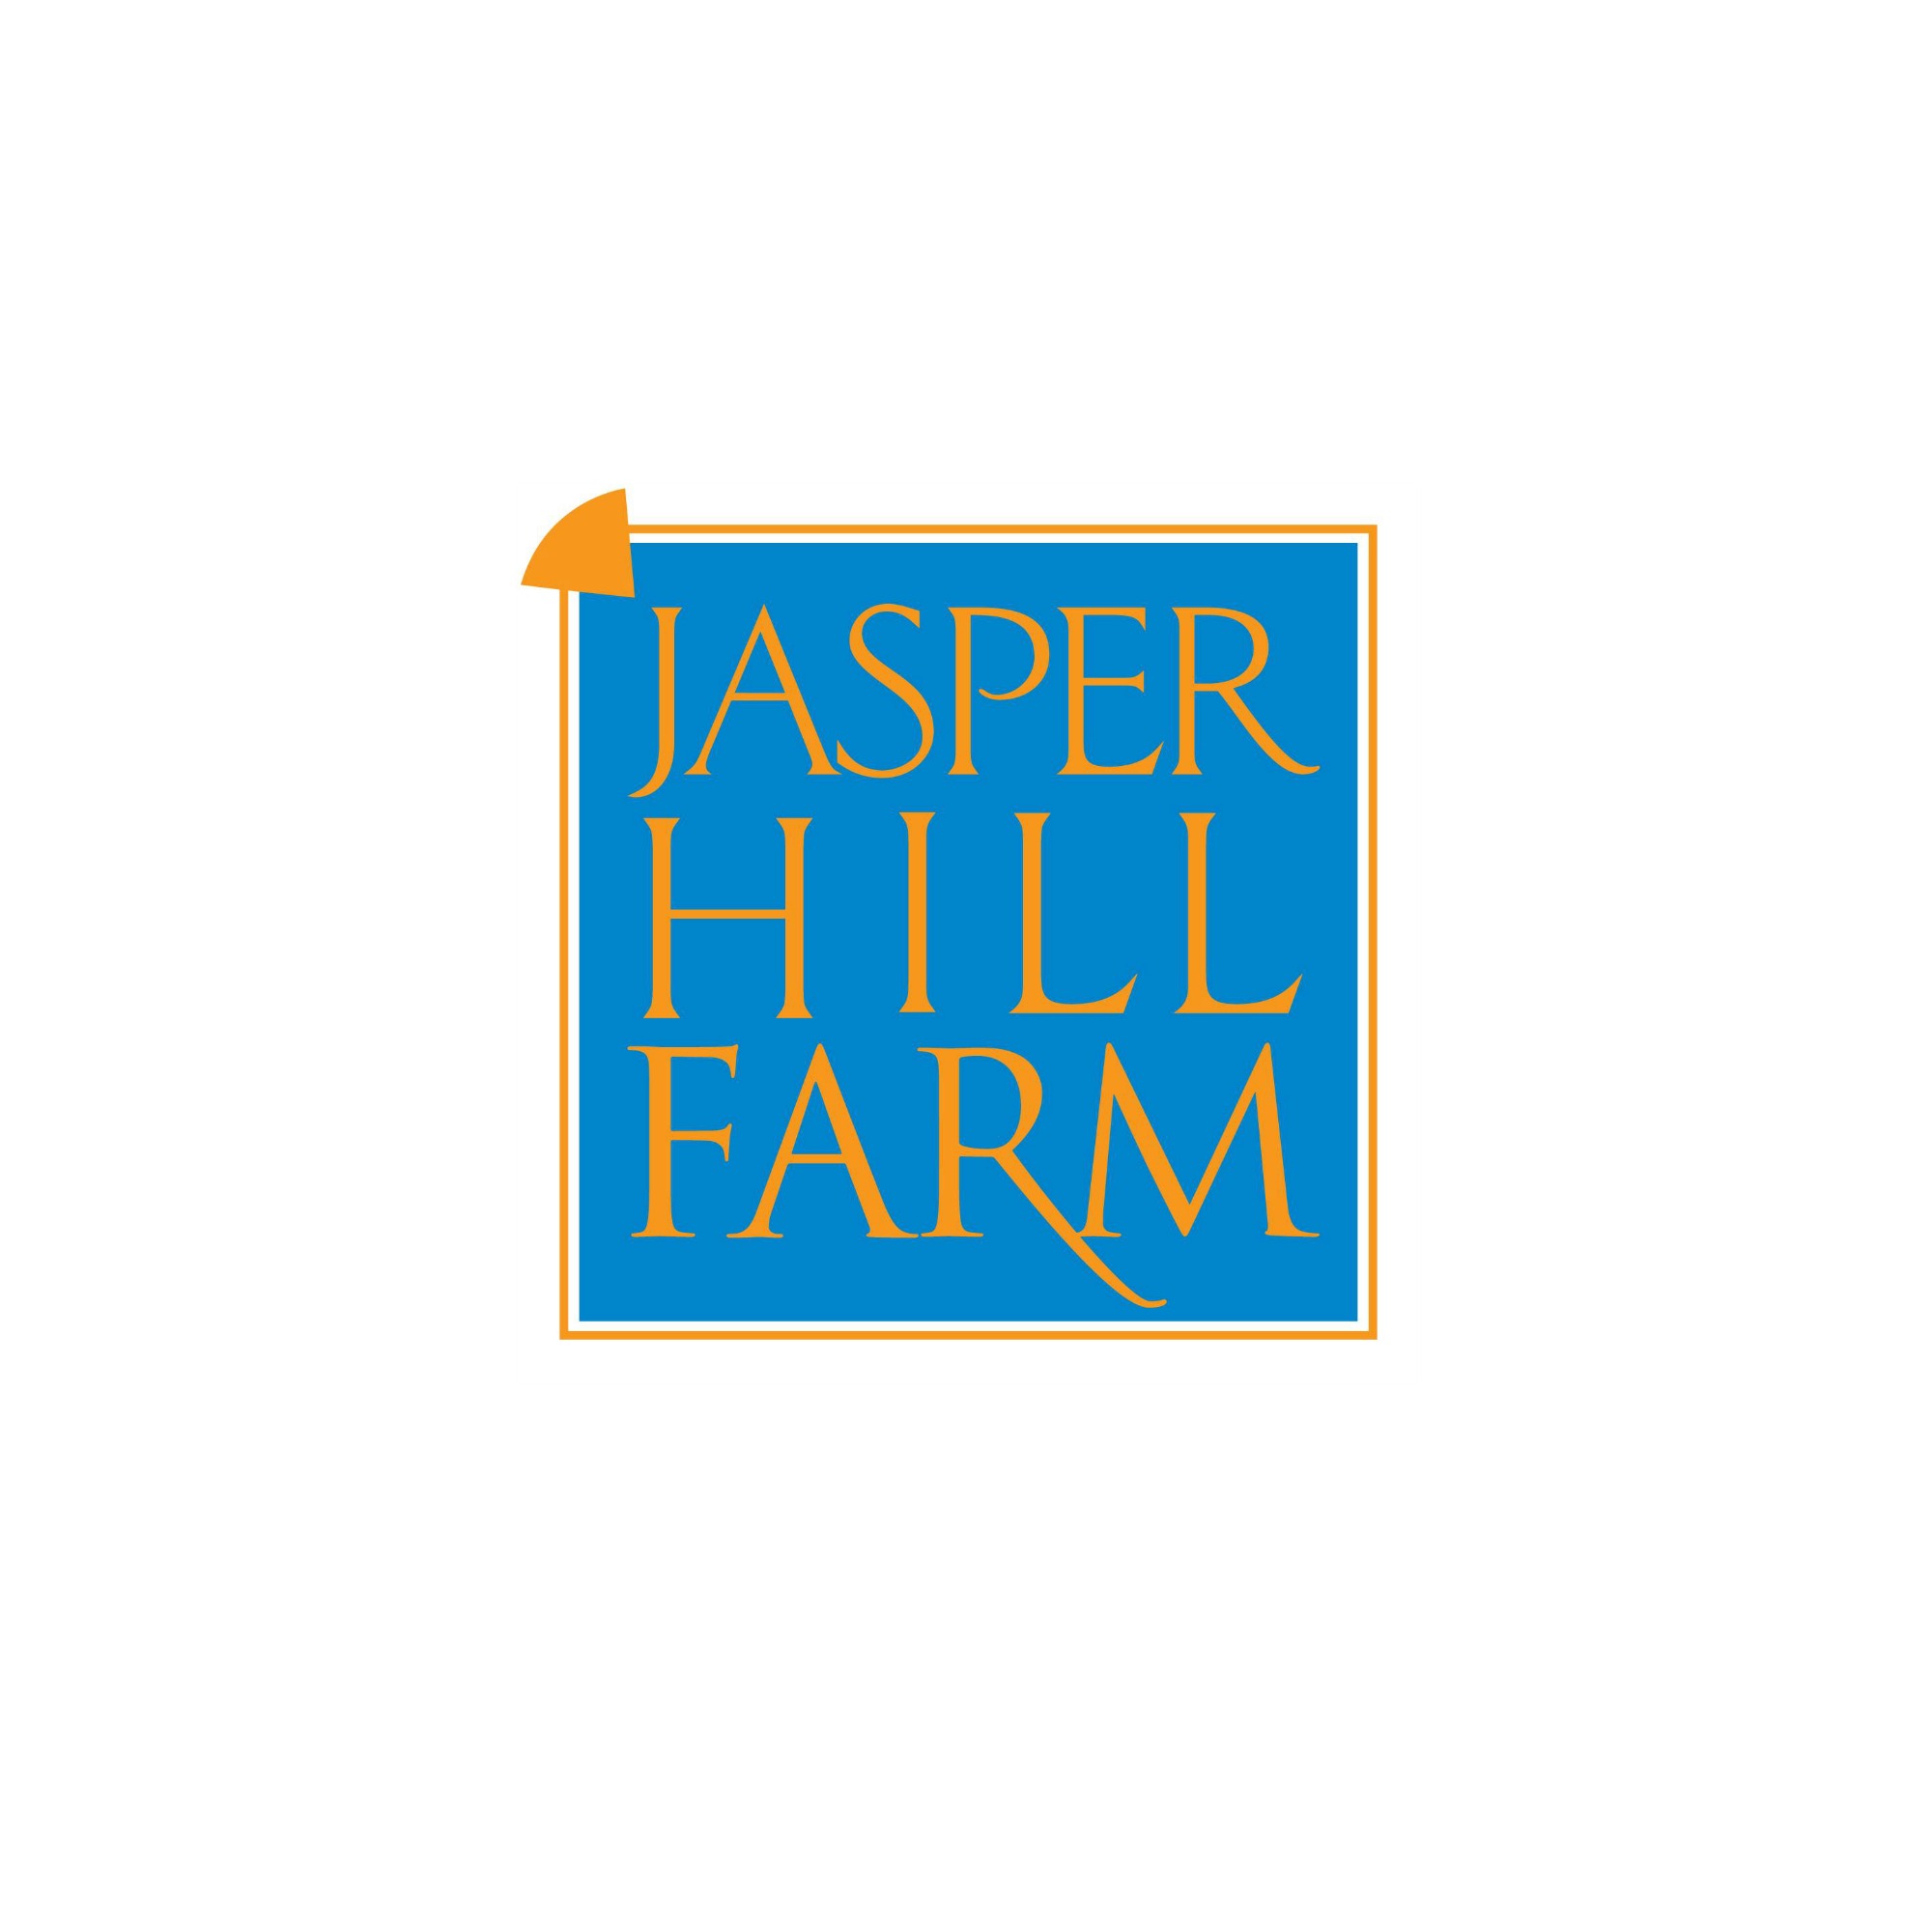  Jasper Hill Farm milks cows and makes cheese in the Northeast Kingdom of Vermont. The Cellars, an underground aging facility, maximizes the potential of cheeses made by Jasper Hill as well as those made by several other local producers. Leftover whe